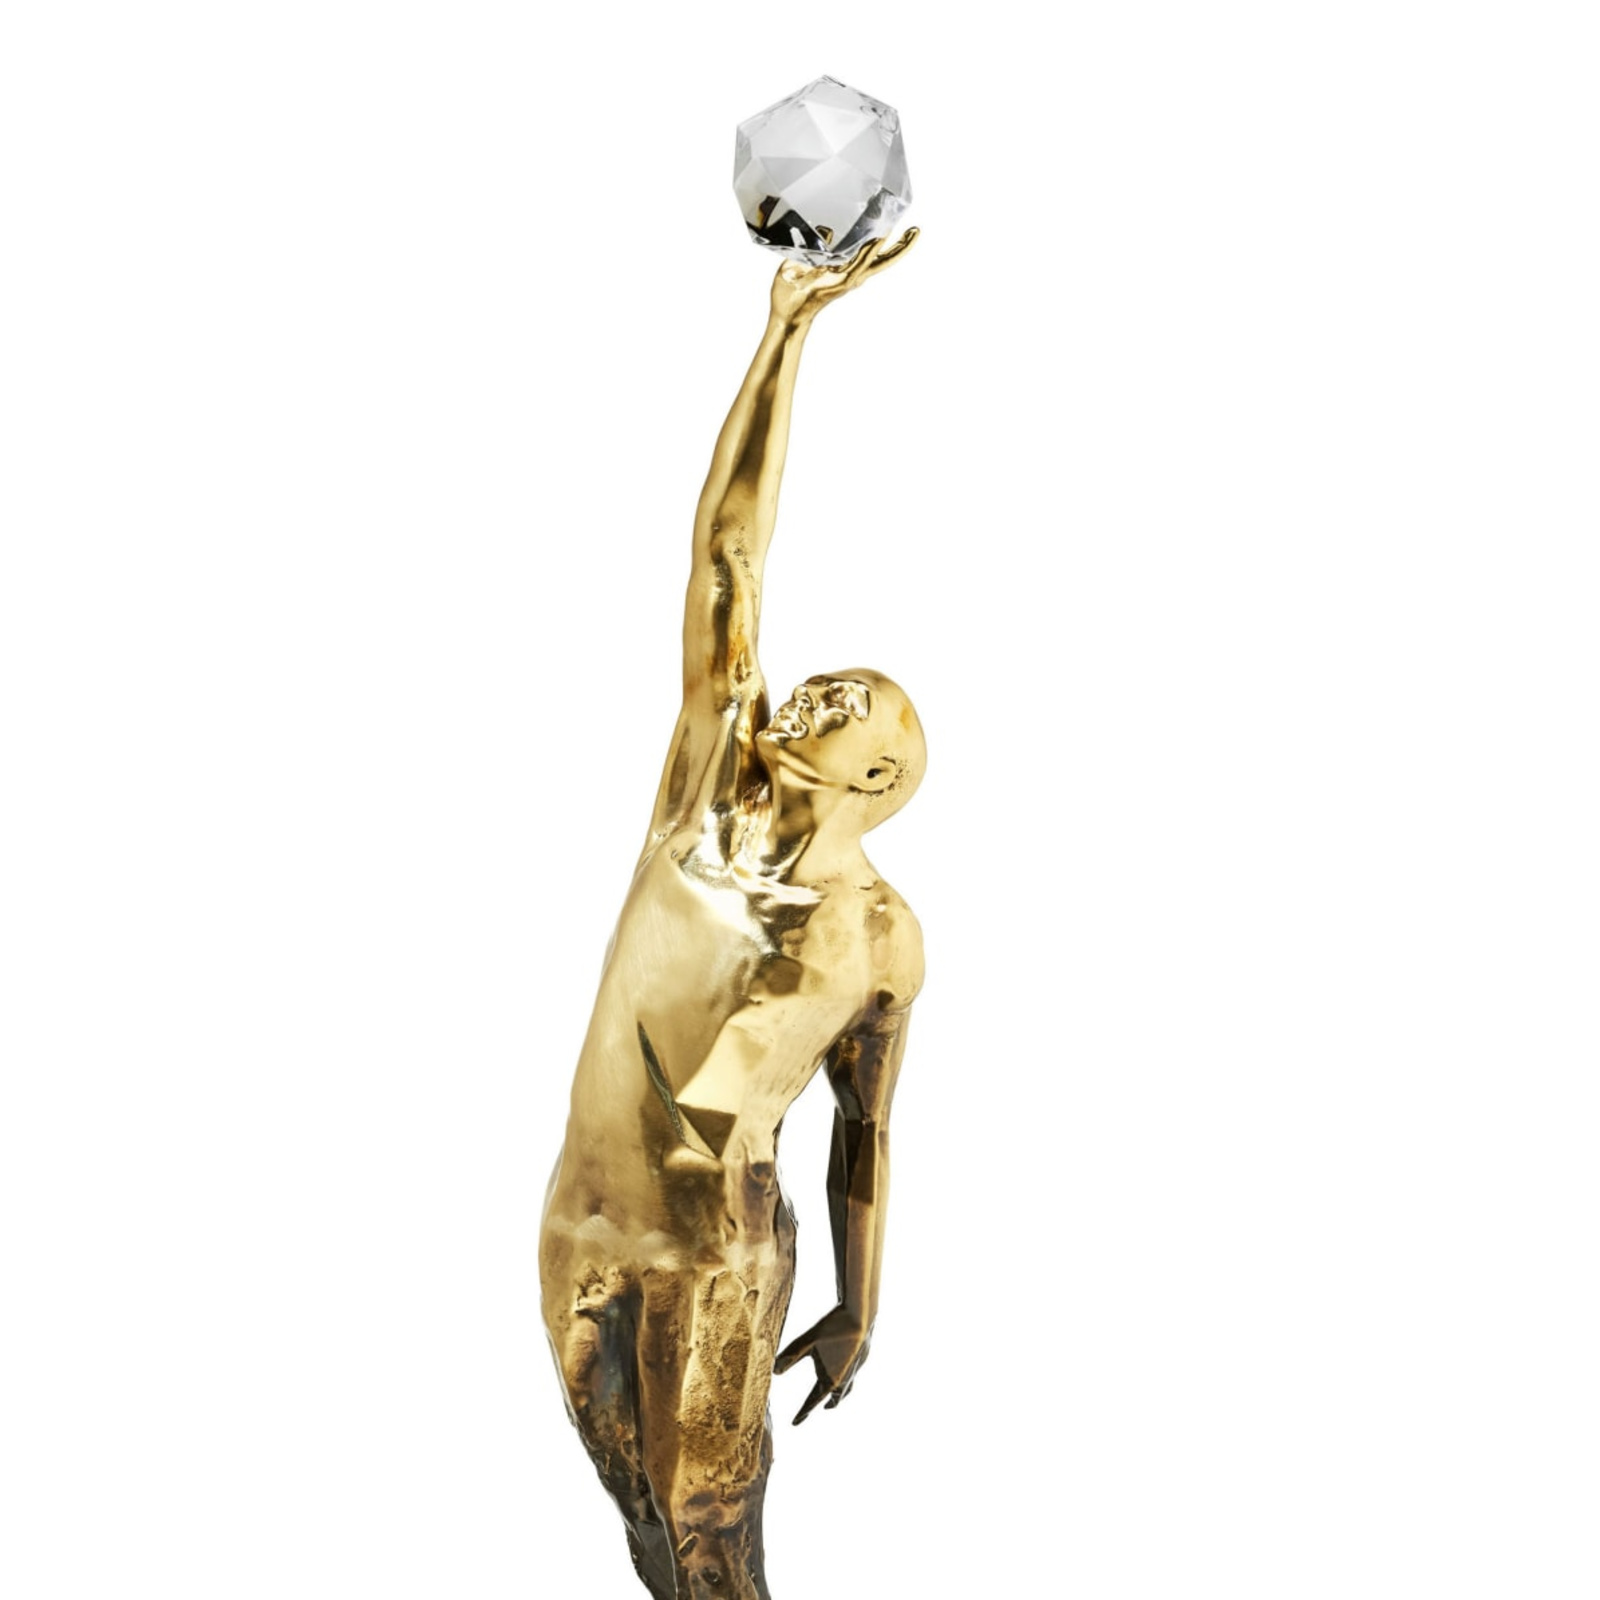  Basketball Trophy NBA Defensive Player Trophy Suitable